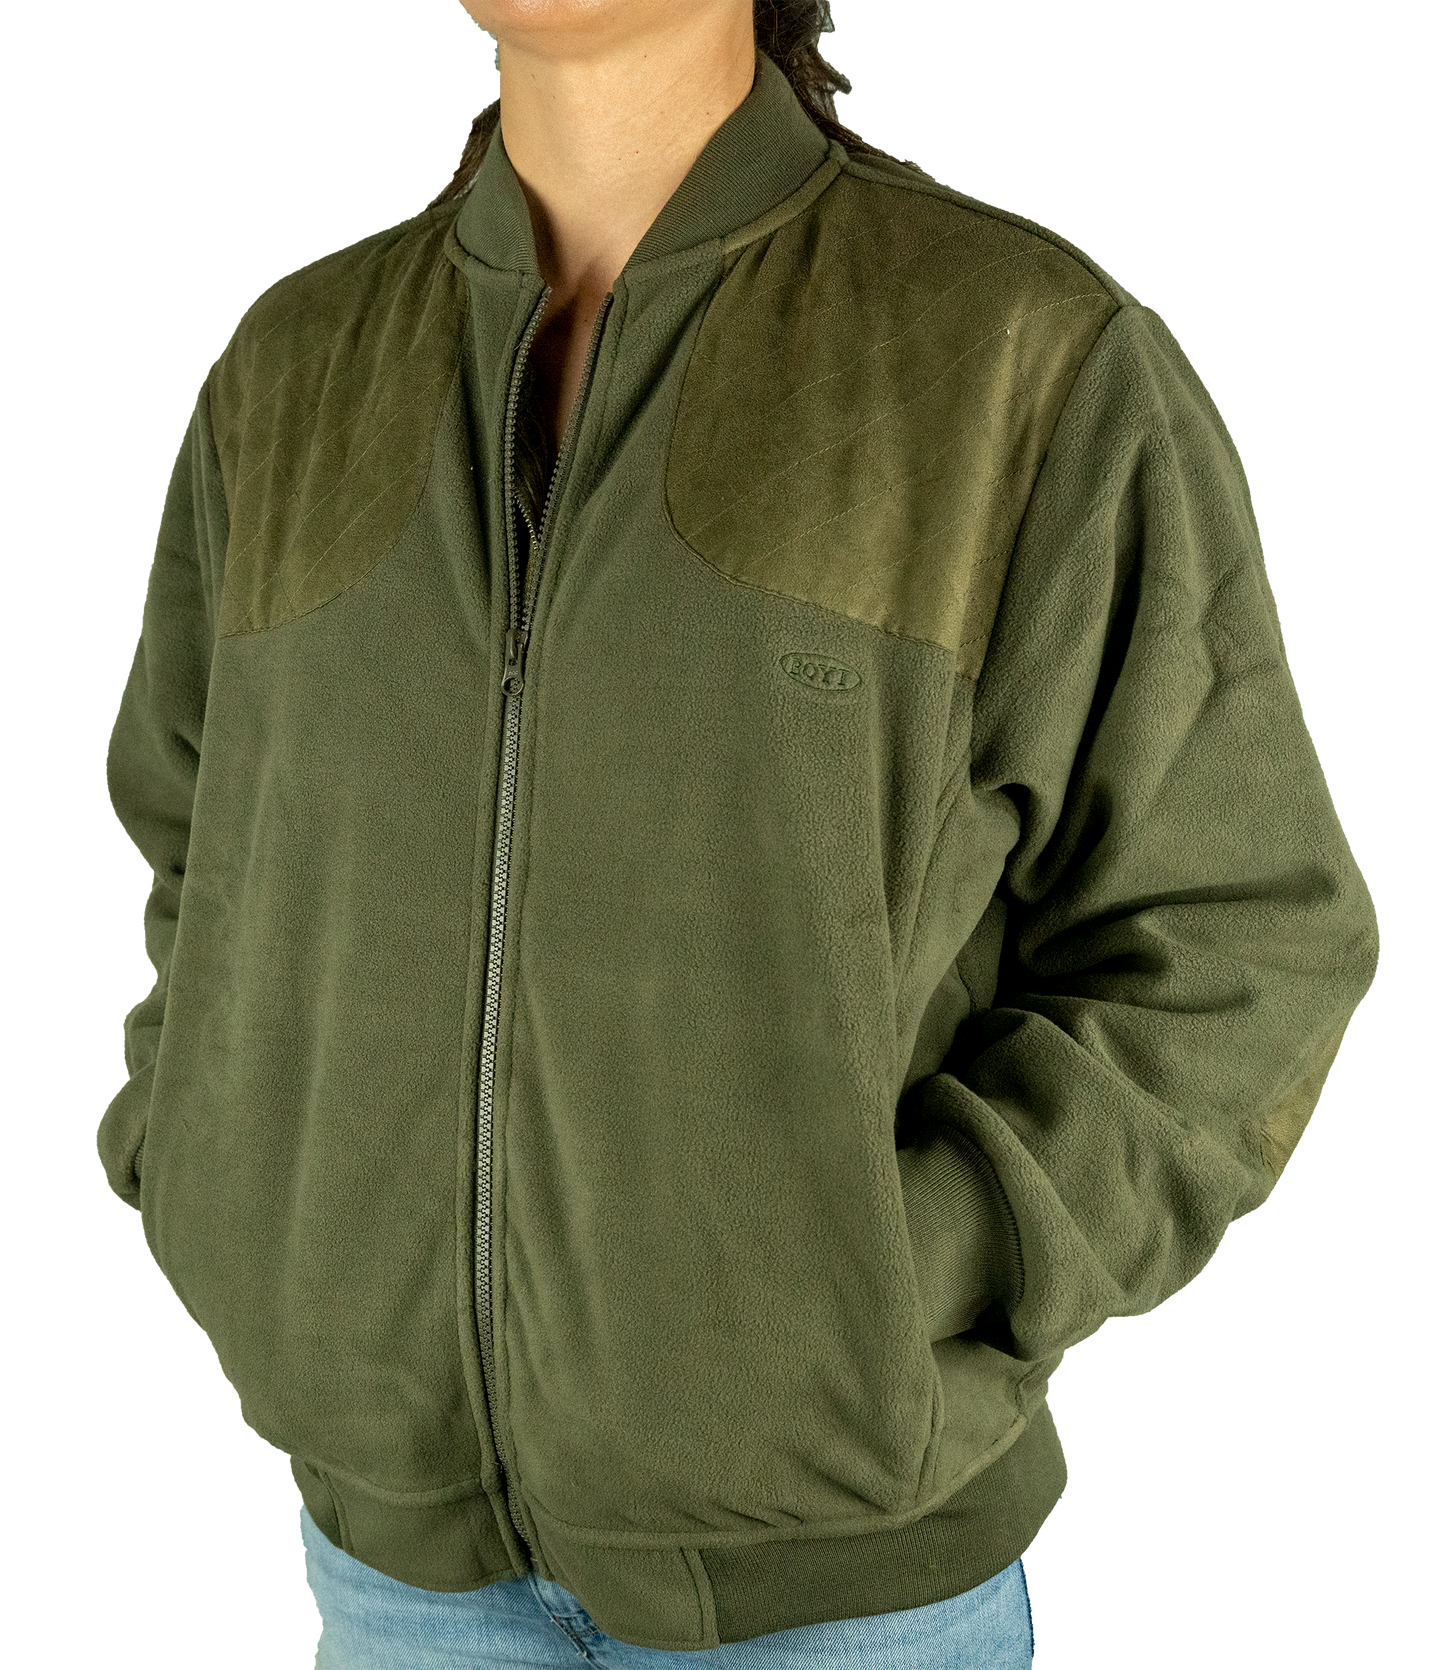 Women's TripleLoc Shooting Jacket With Pads